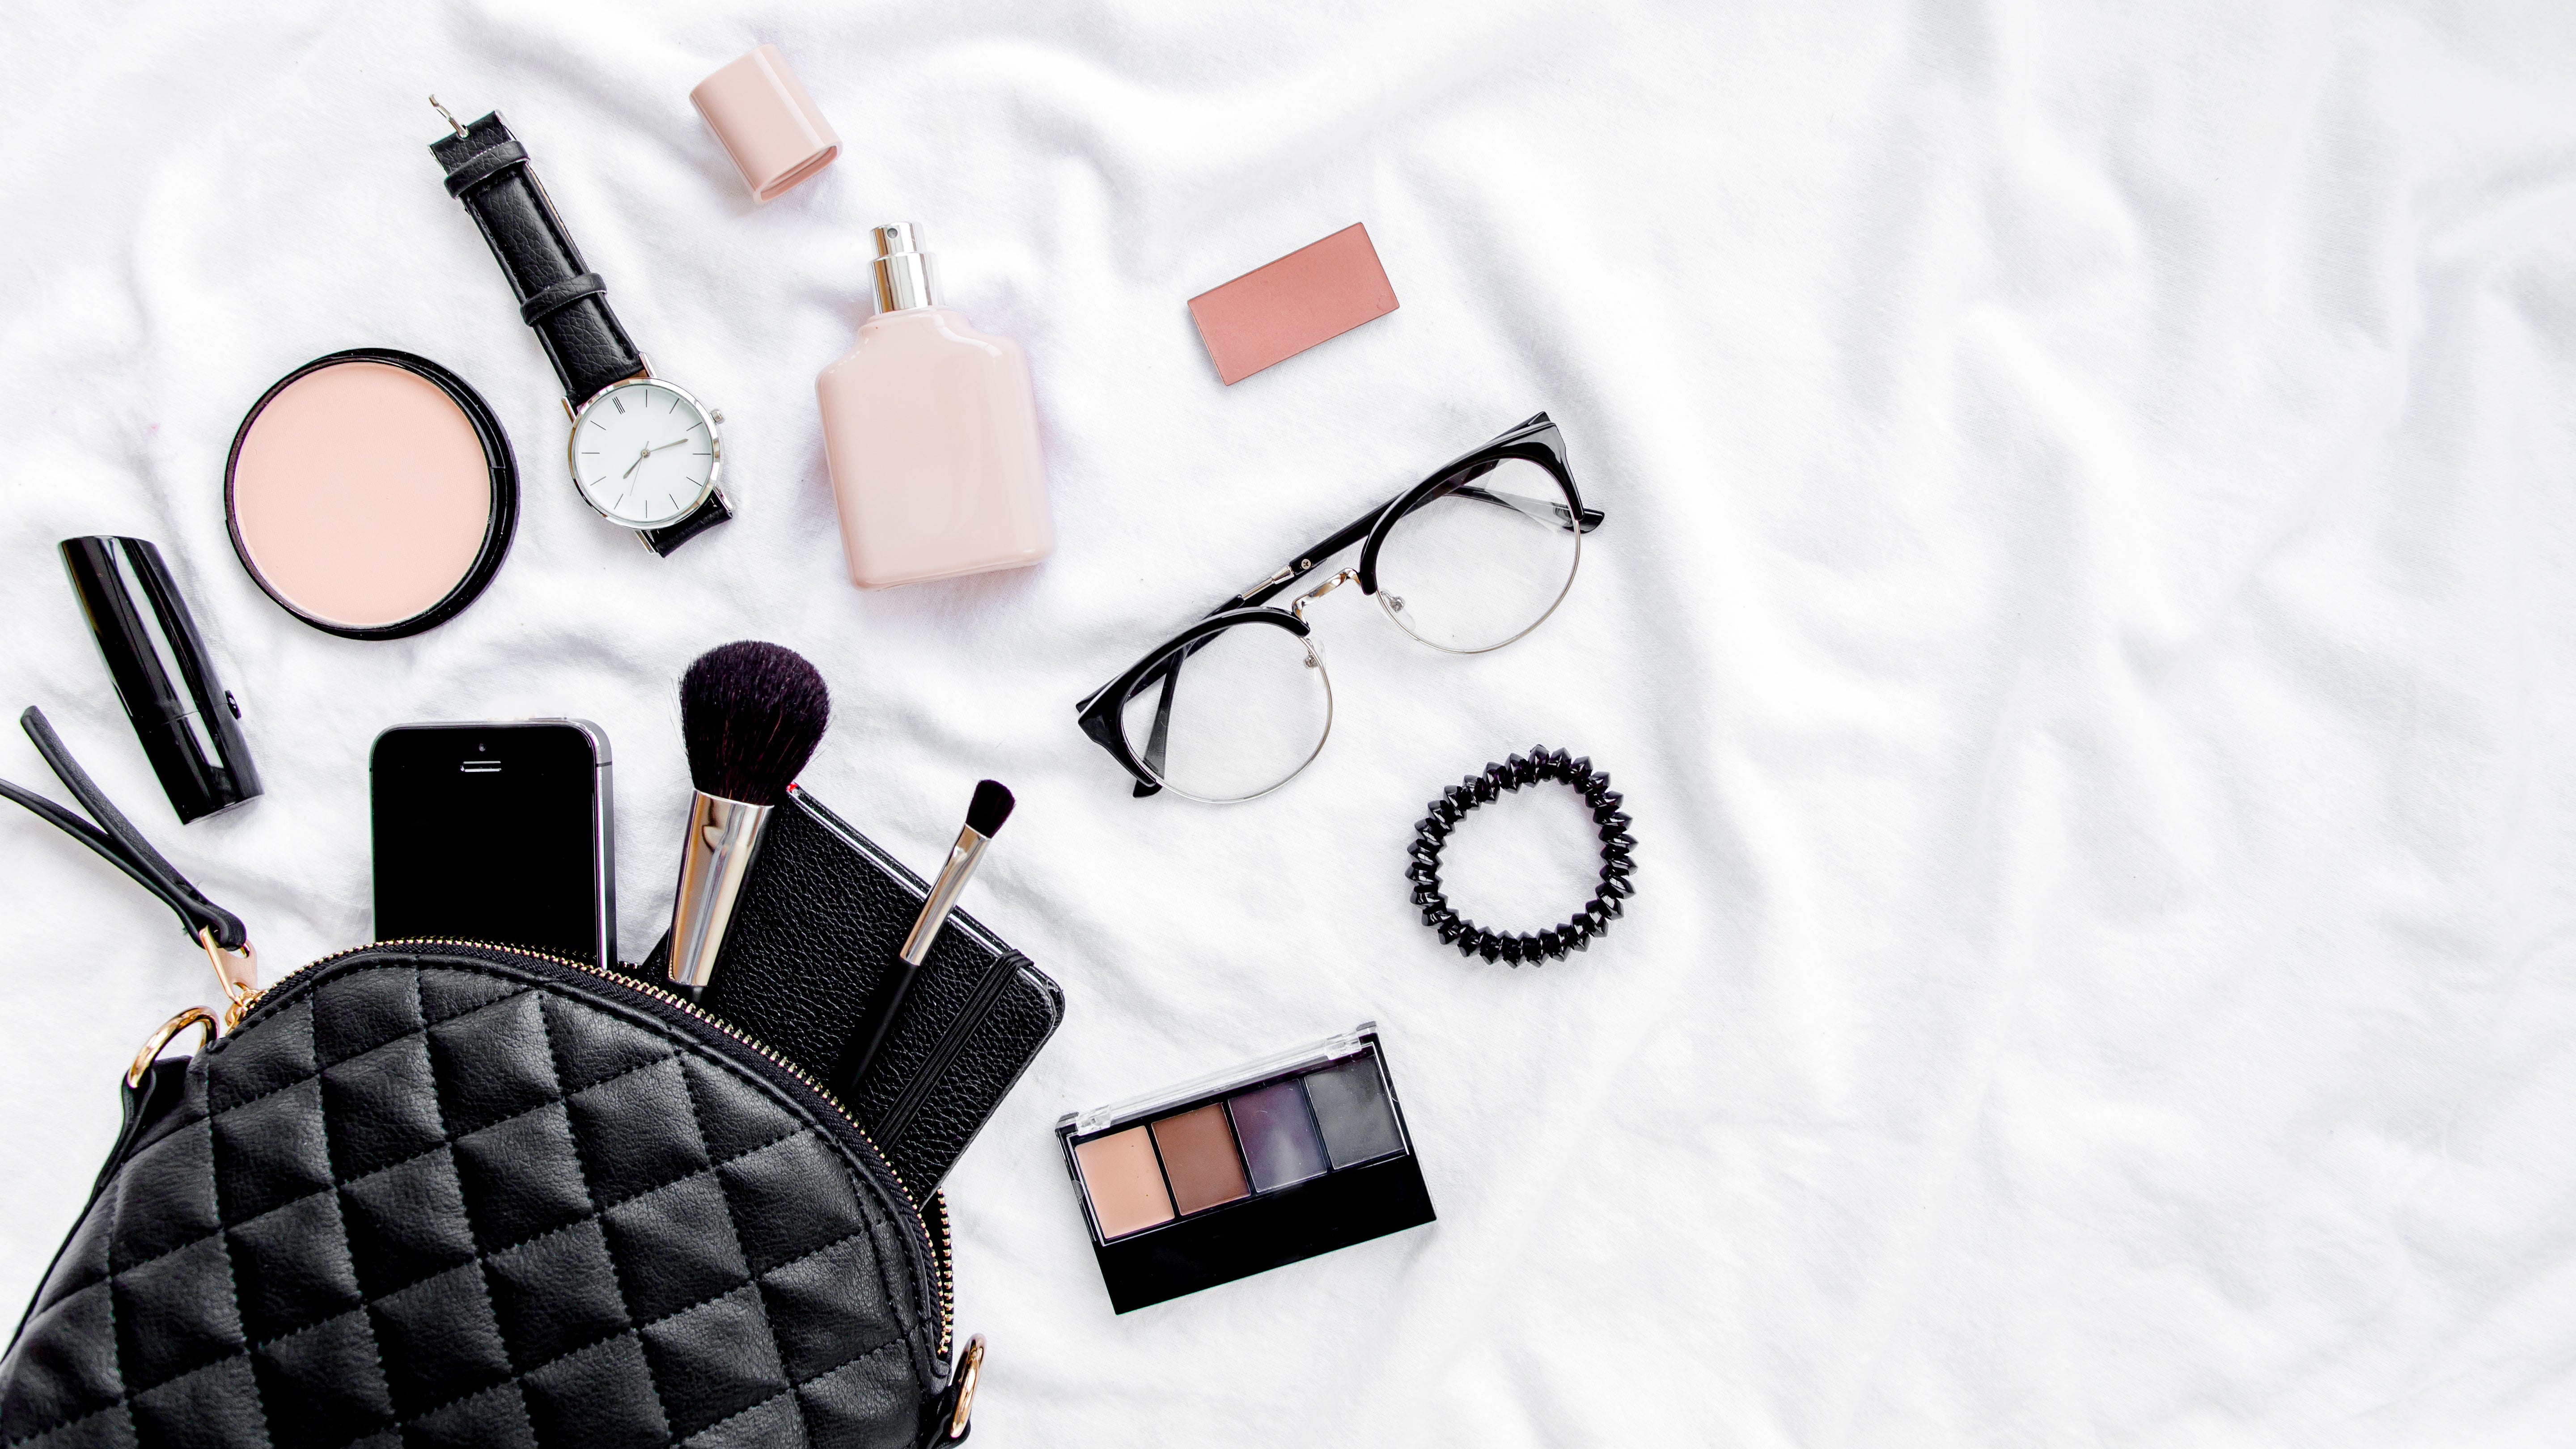 purse with essential cosmetics and accessories